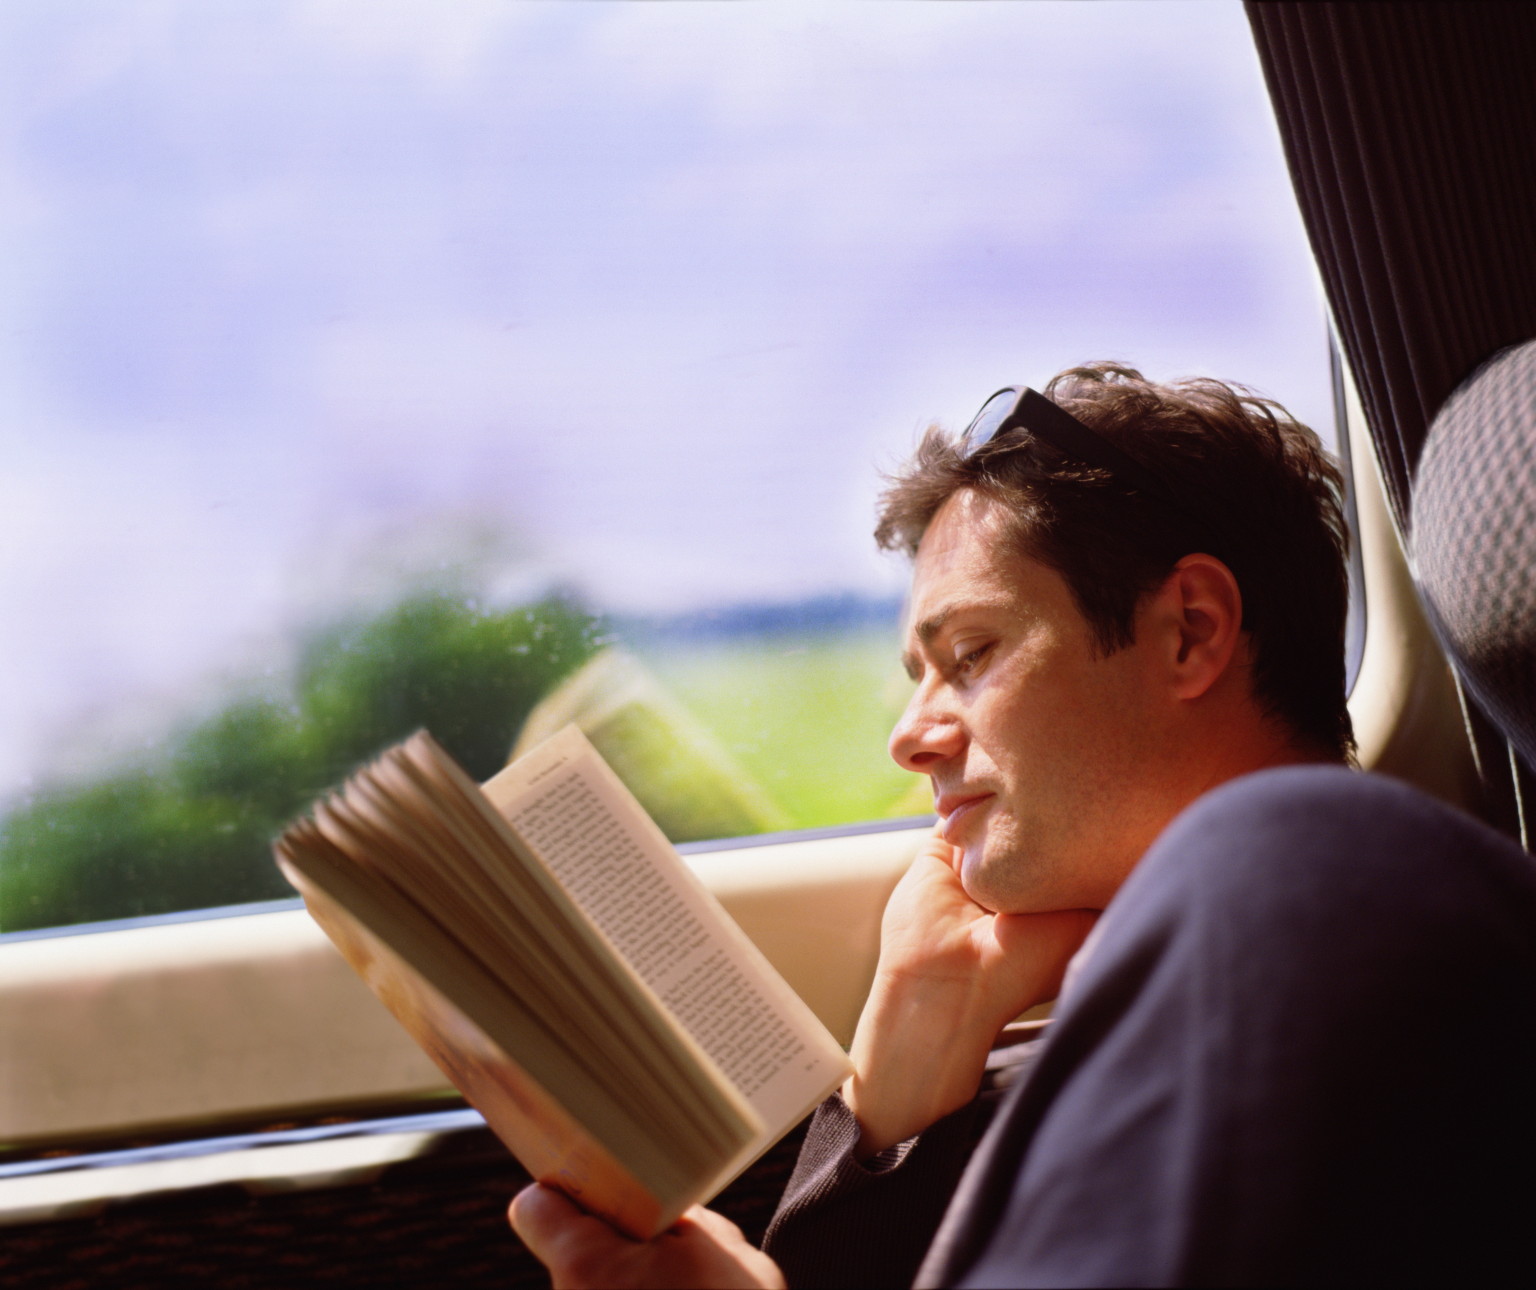 Young man travelling on train, reading book, profile